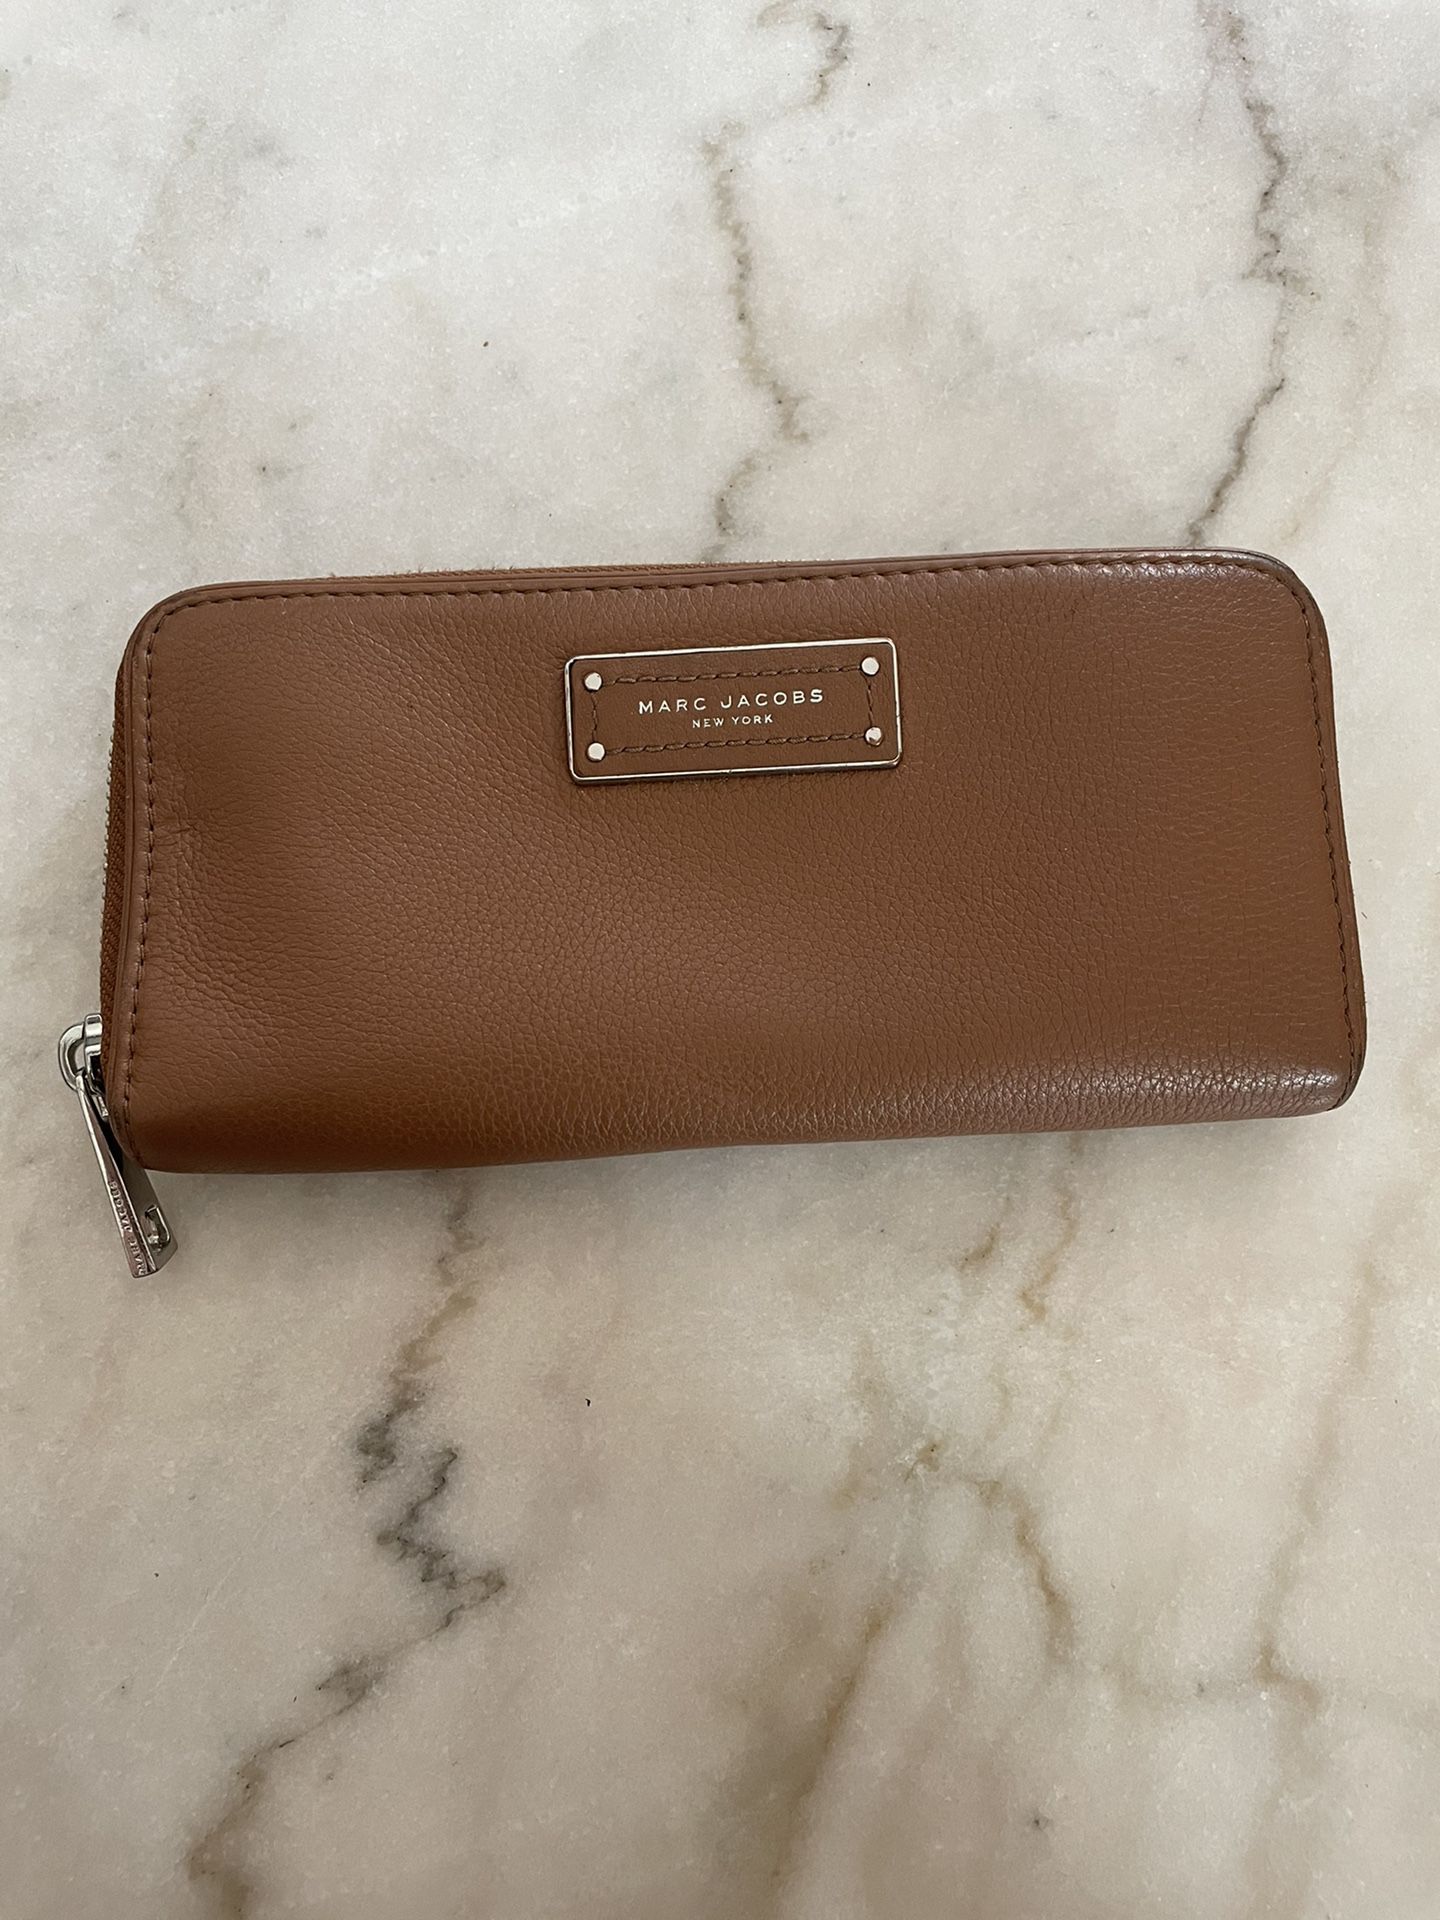 Marc jacobs Wallet